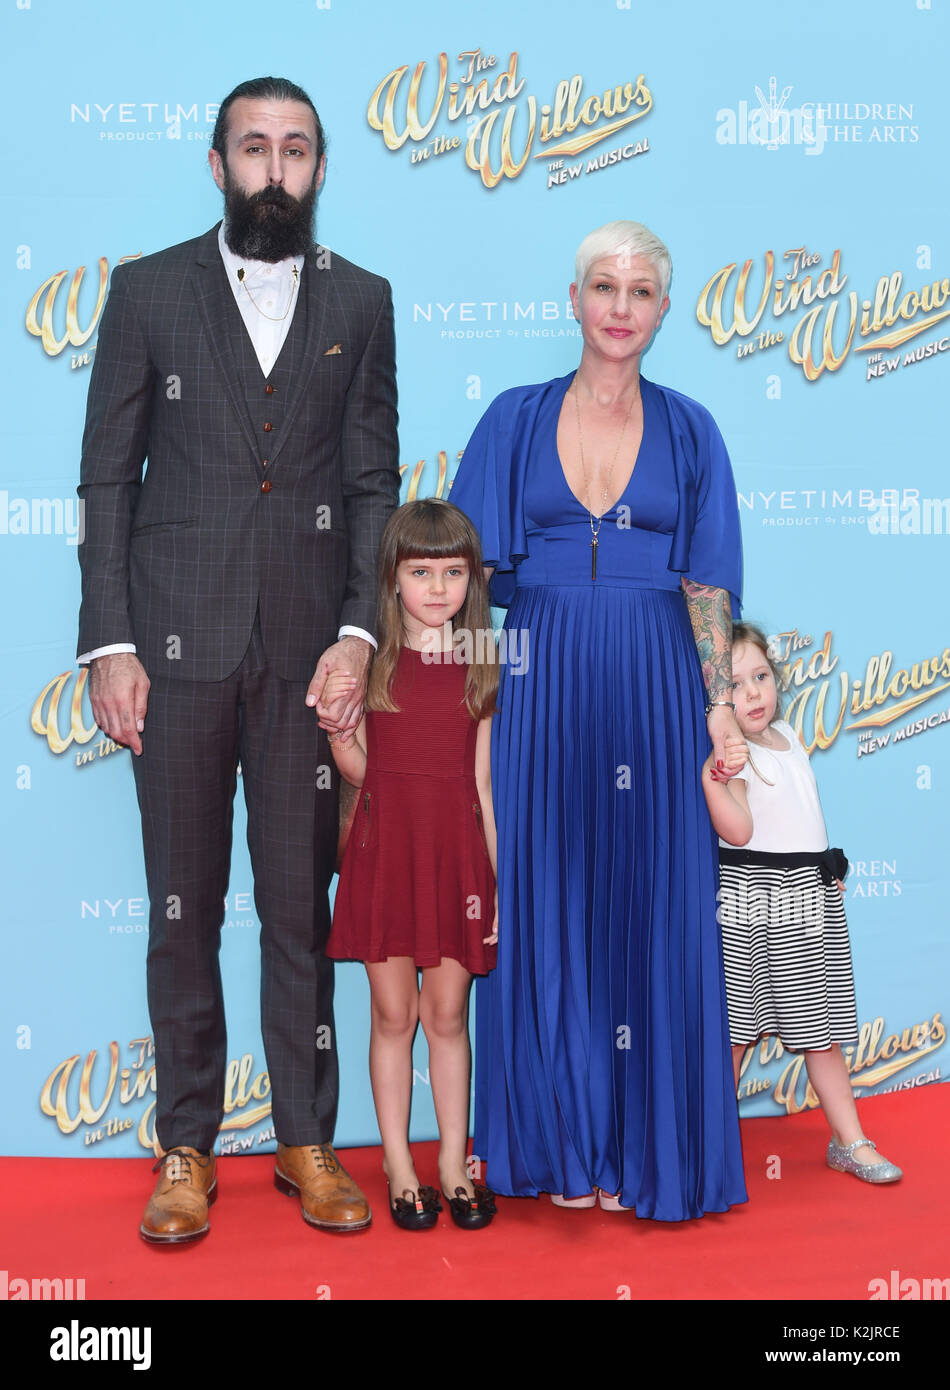 Photo Must Be Credited ©Alpha Press 079965 29/09/2017 Scroobius Pip and family at The Wind in the Willows Gala Performance at the London Palladium. Stock Photo